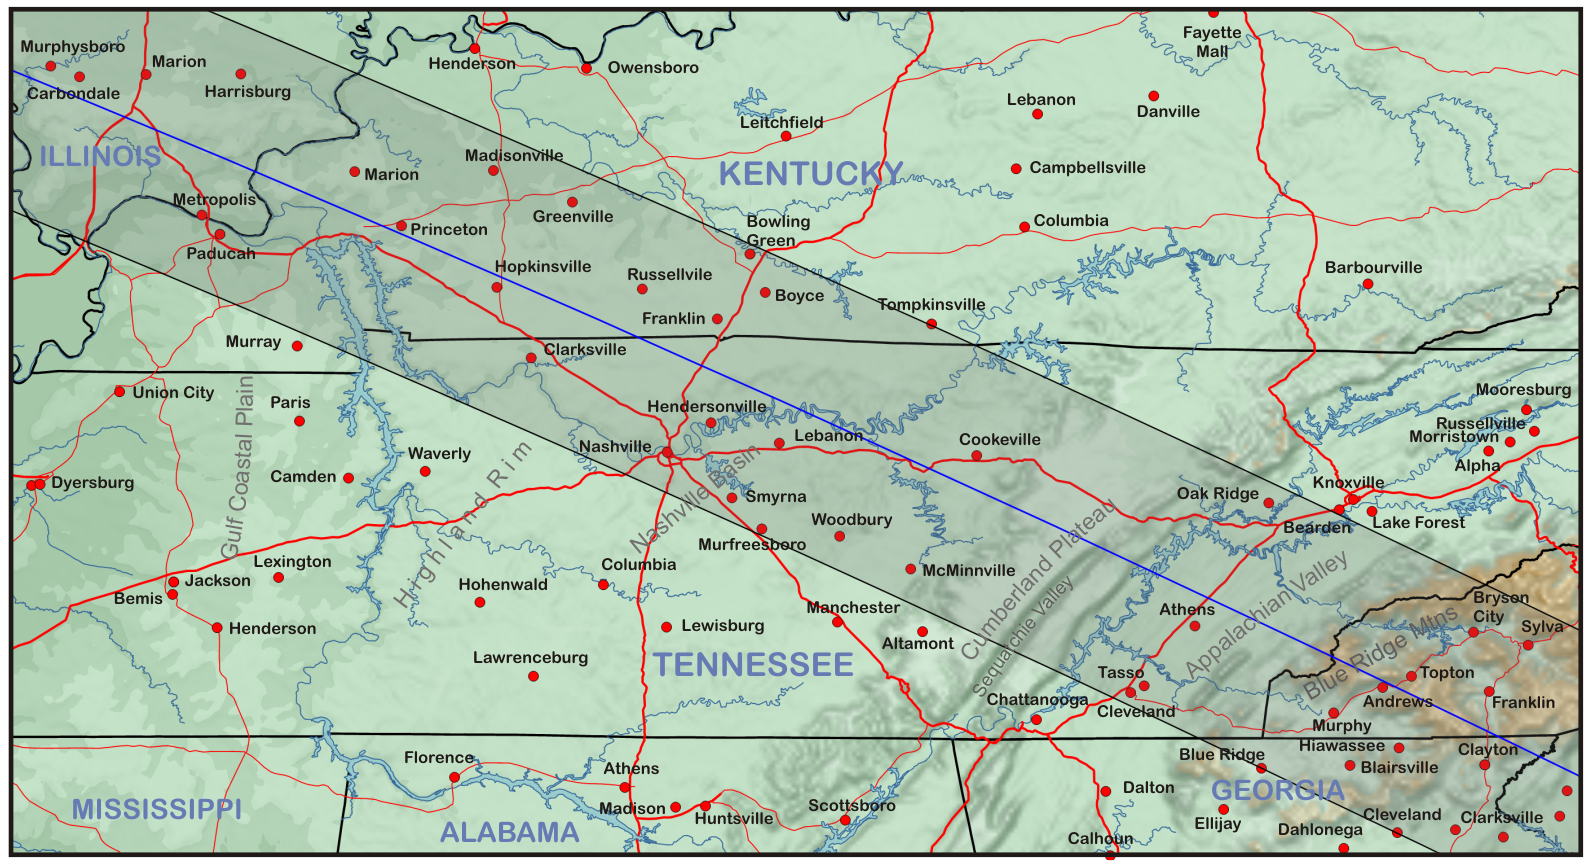 Kentucky And Tennessee Eclipsophile